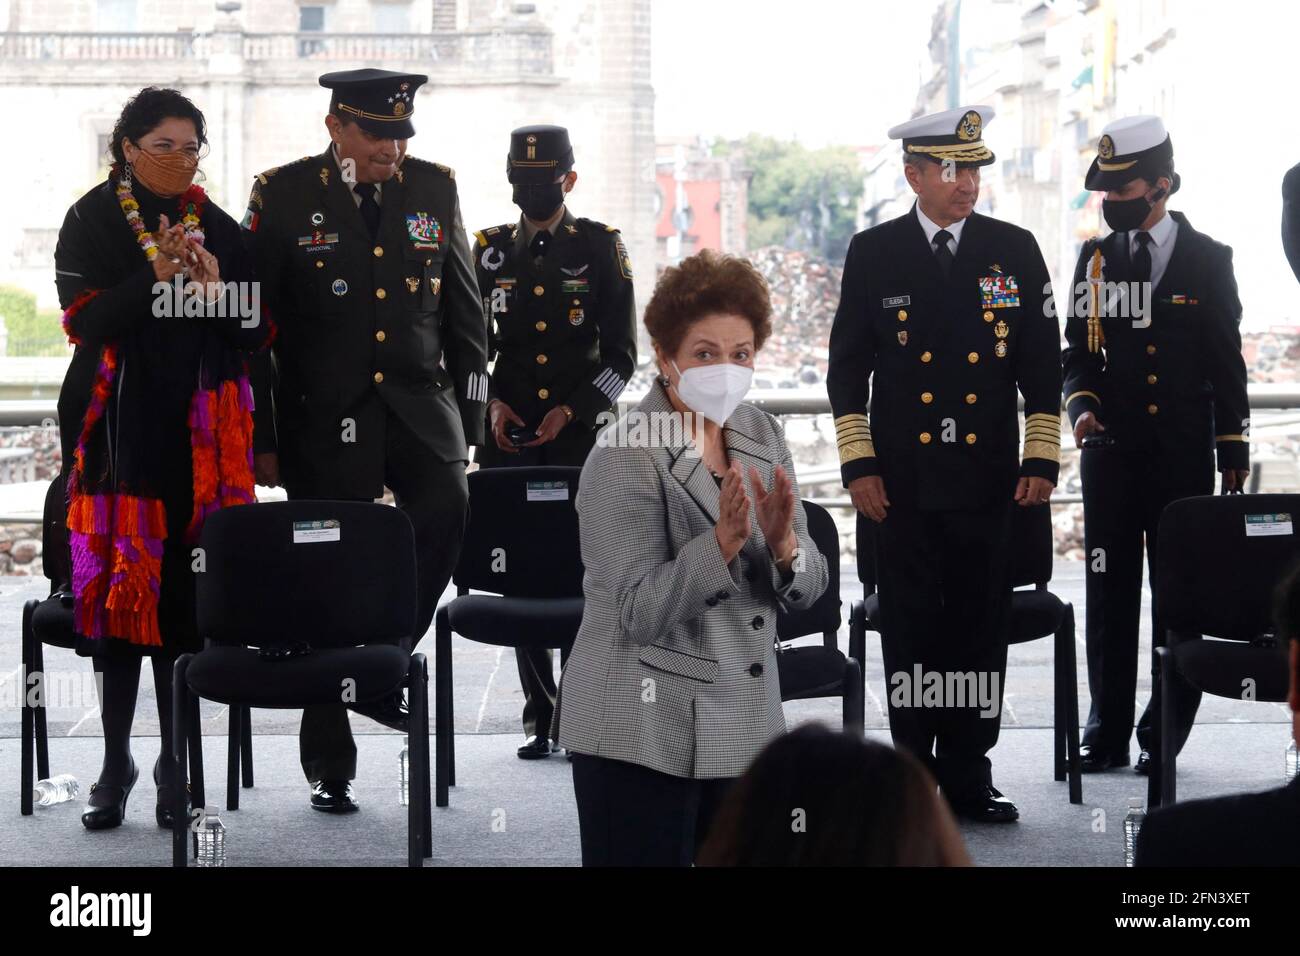 Mexico City, Mexico. 13th May, 2021. MEXICO CITY, MEXICO - MAY 13:The former president of Brazil, Dilma Rousseff, during the ceremony 'Mexico - Tenochtitlan, more than seven centuries of history' at the Museo del Templo Mayor on May 13, 2021 in Mexico City, Mexico. Photo by Luis Barron/Eyepix/ABACAPRESS.COM Credit: Abaca Press/Alamy Live News Stock Photo